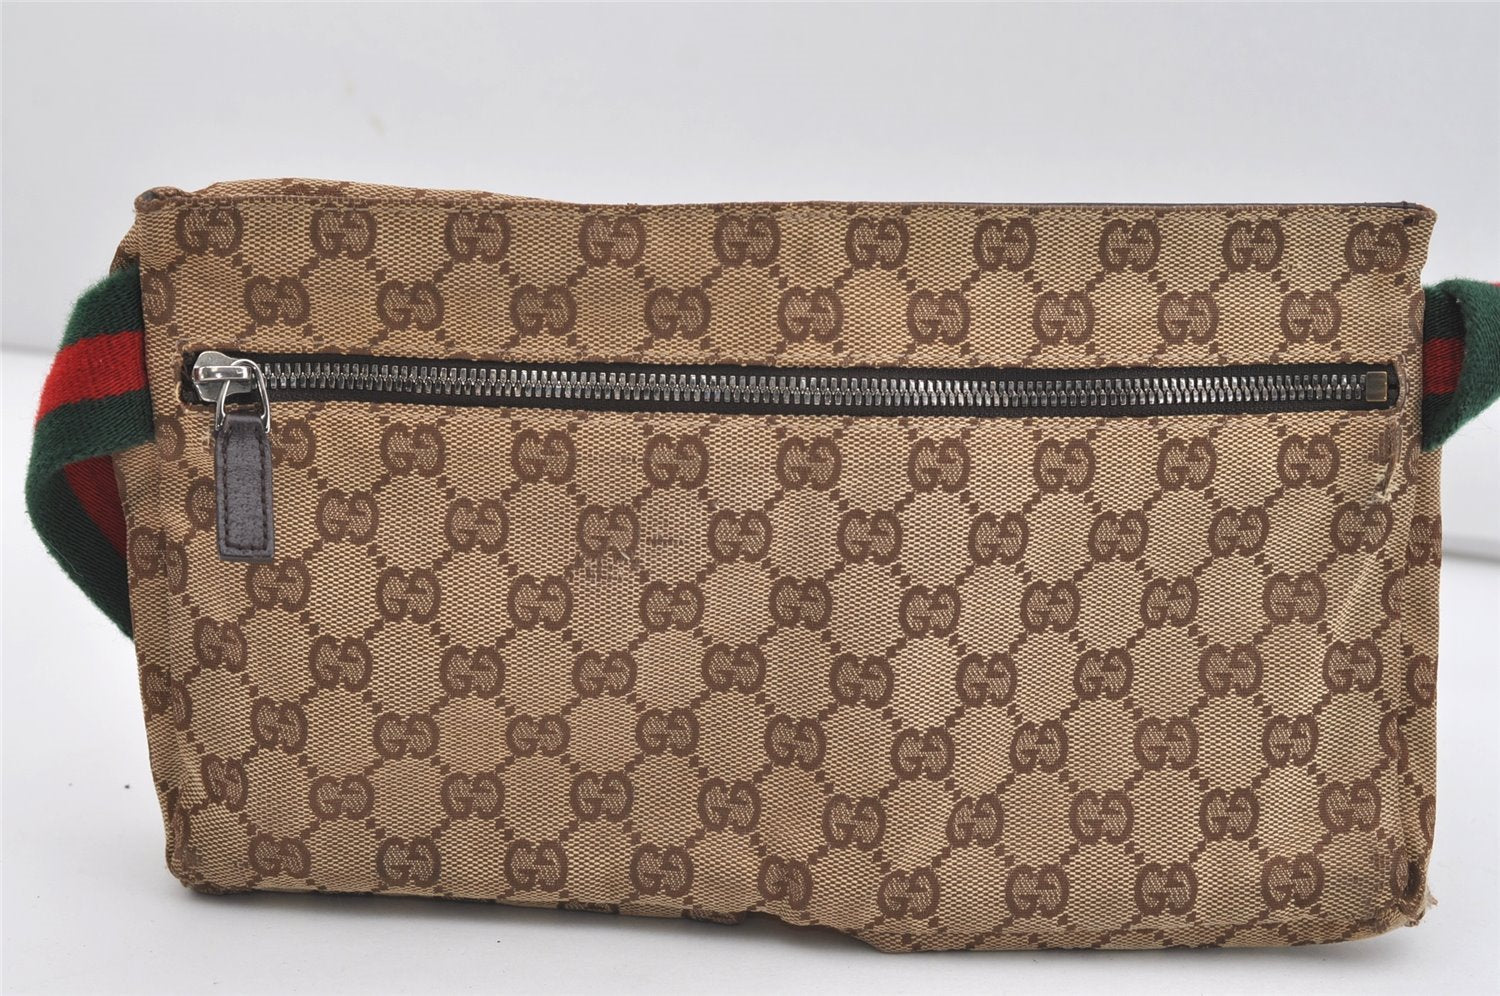 Authentic GUCCI Sherry Line Waist Body Bag GG Canvas Leather 28566 Brown 3629J